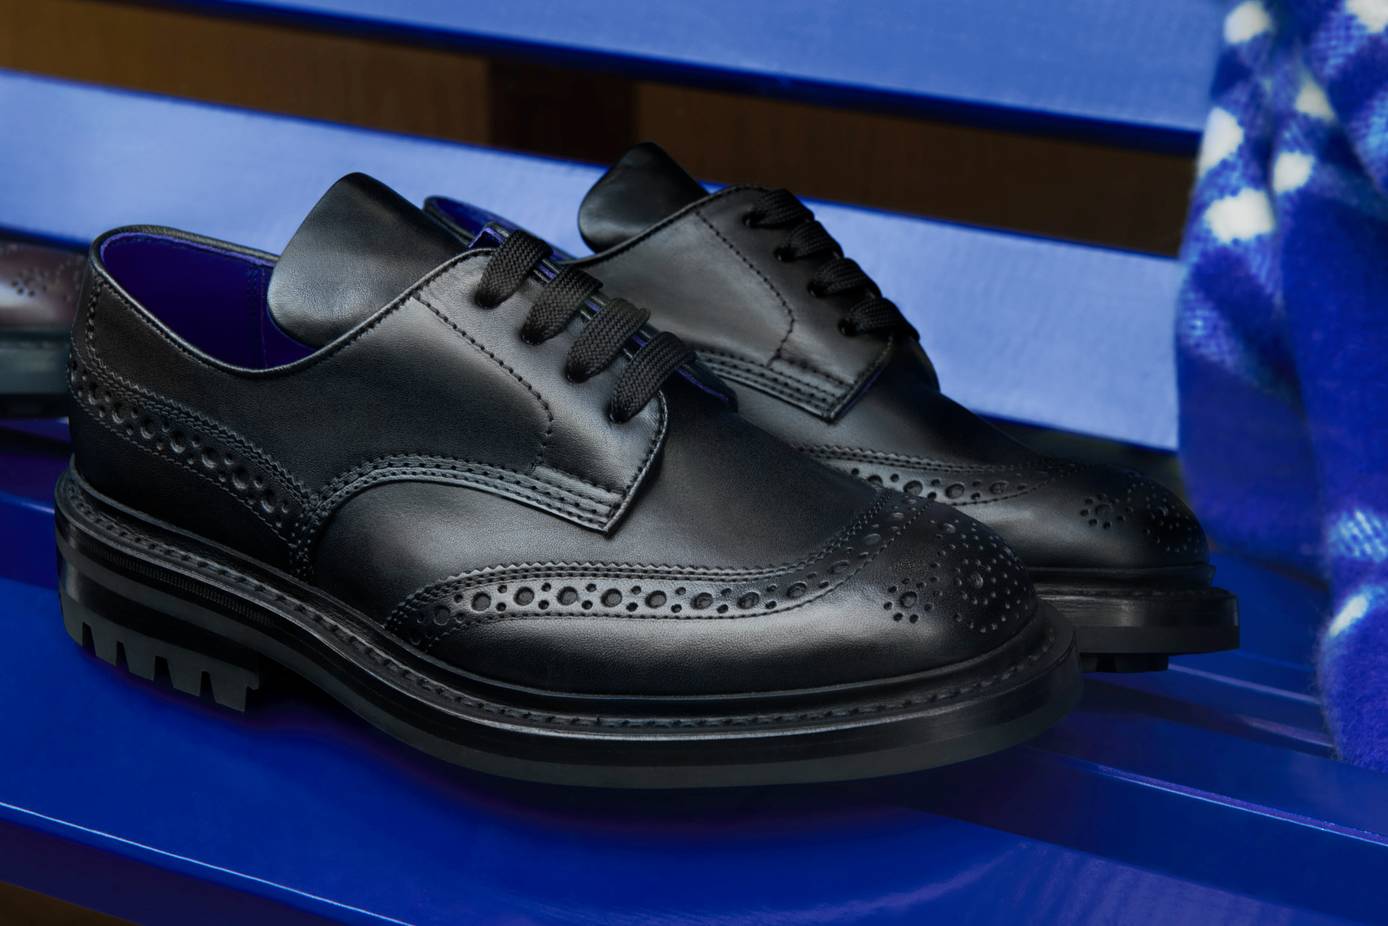 Burberry highlights British craftsmanship with Tricker's collection